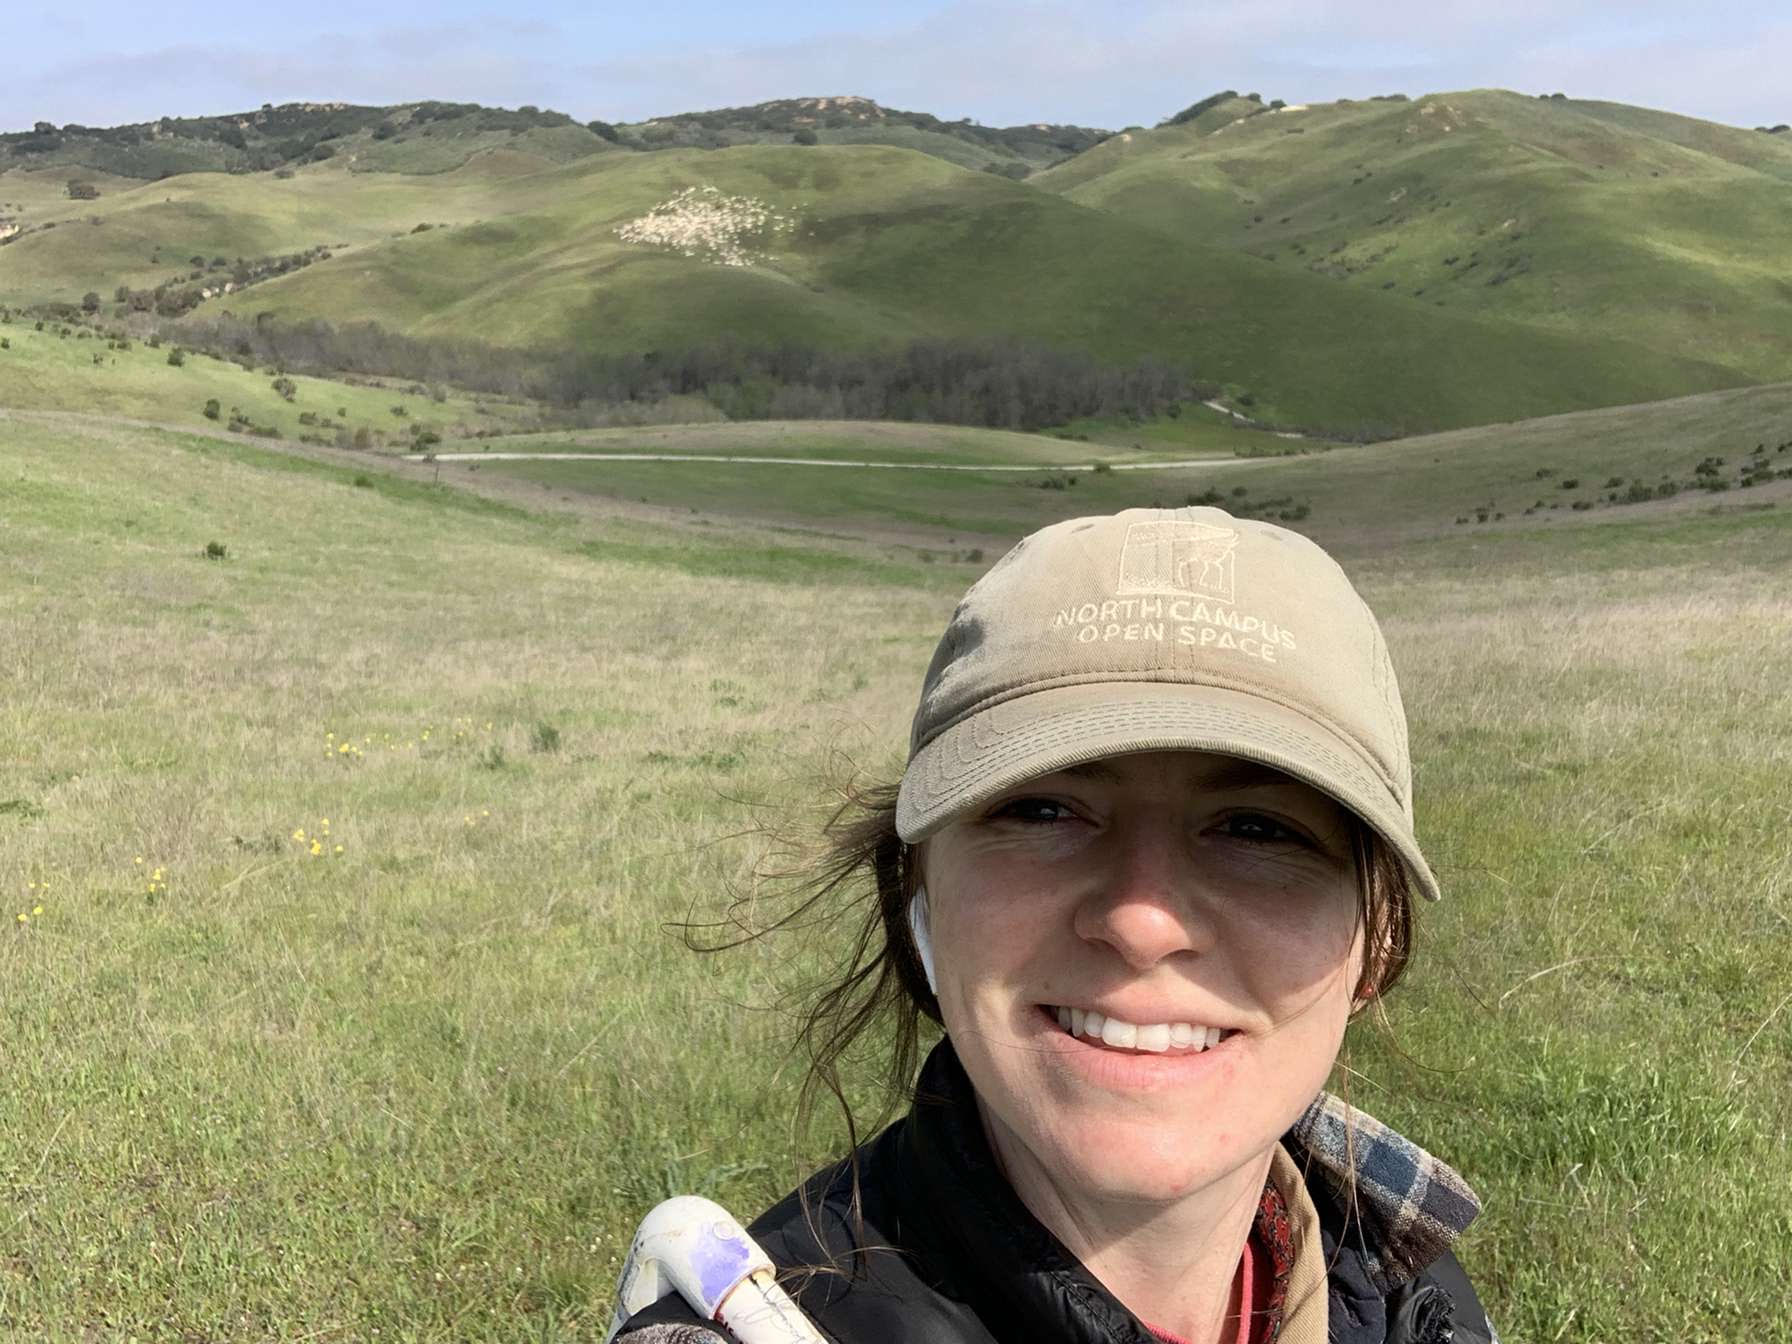 Sarah smiling and taking a selfie while standing in a grassland